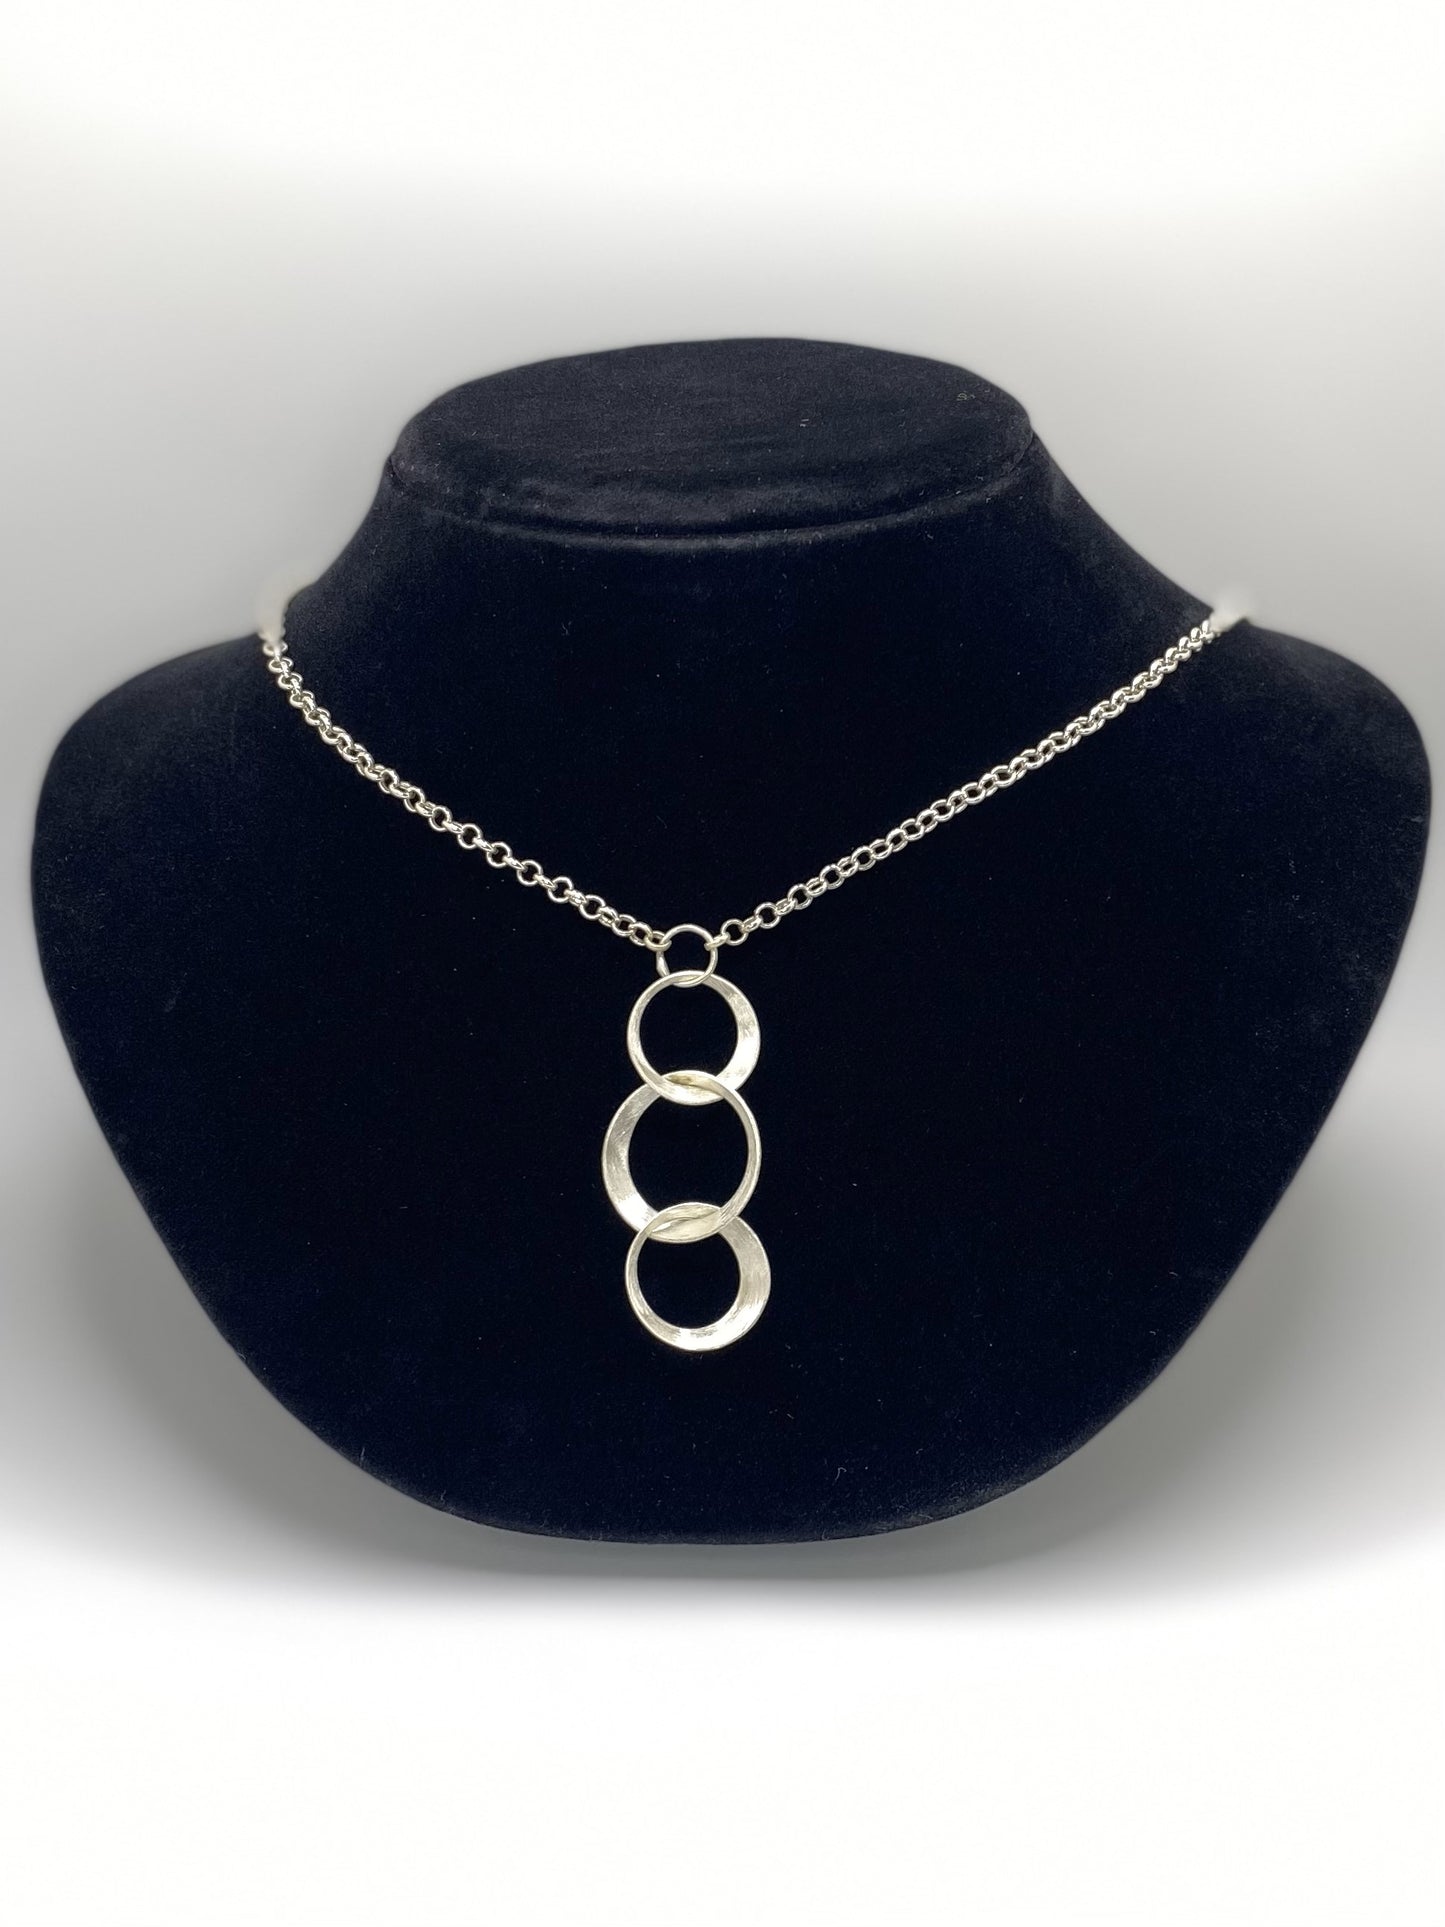 Three Handmade Small Circles Sterling Silver Necklace with Sterling Chain